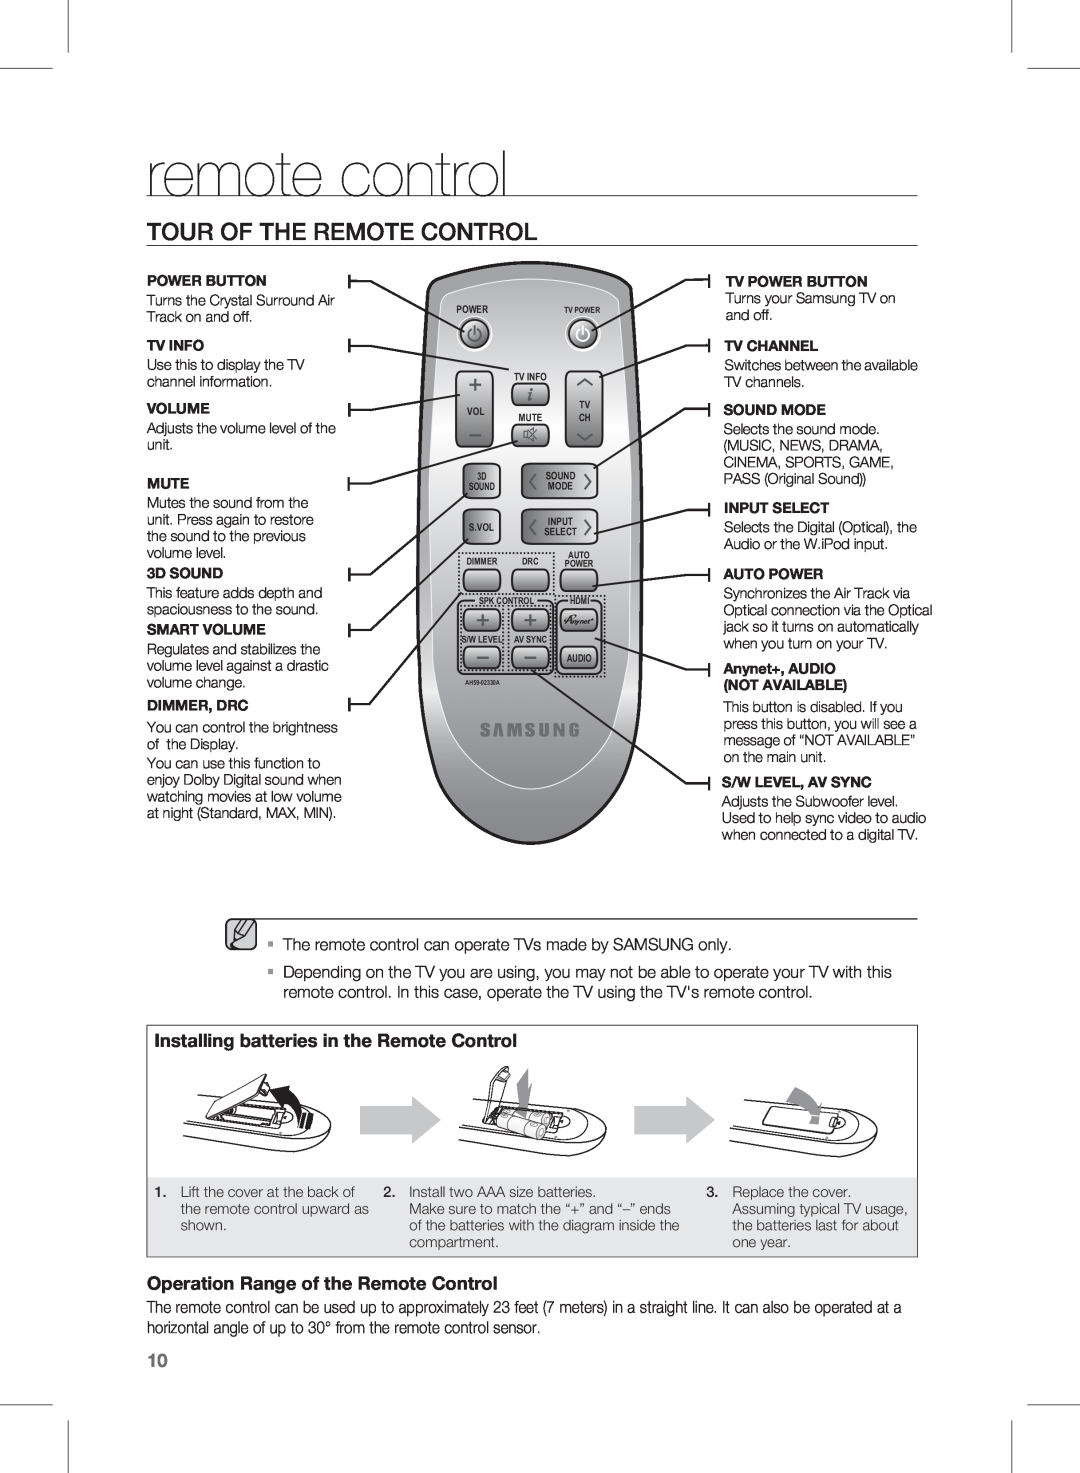 Samsung HW-D450, HW-D451 user manual remote control, Tour of the Remote Control, Installing batteries in the Remote Control 